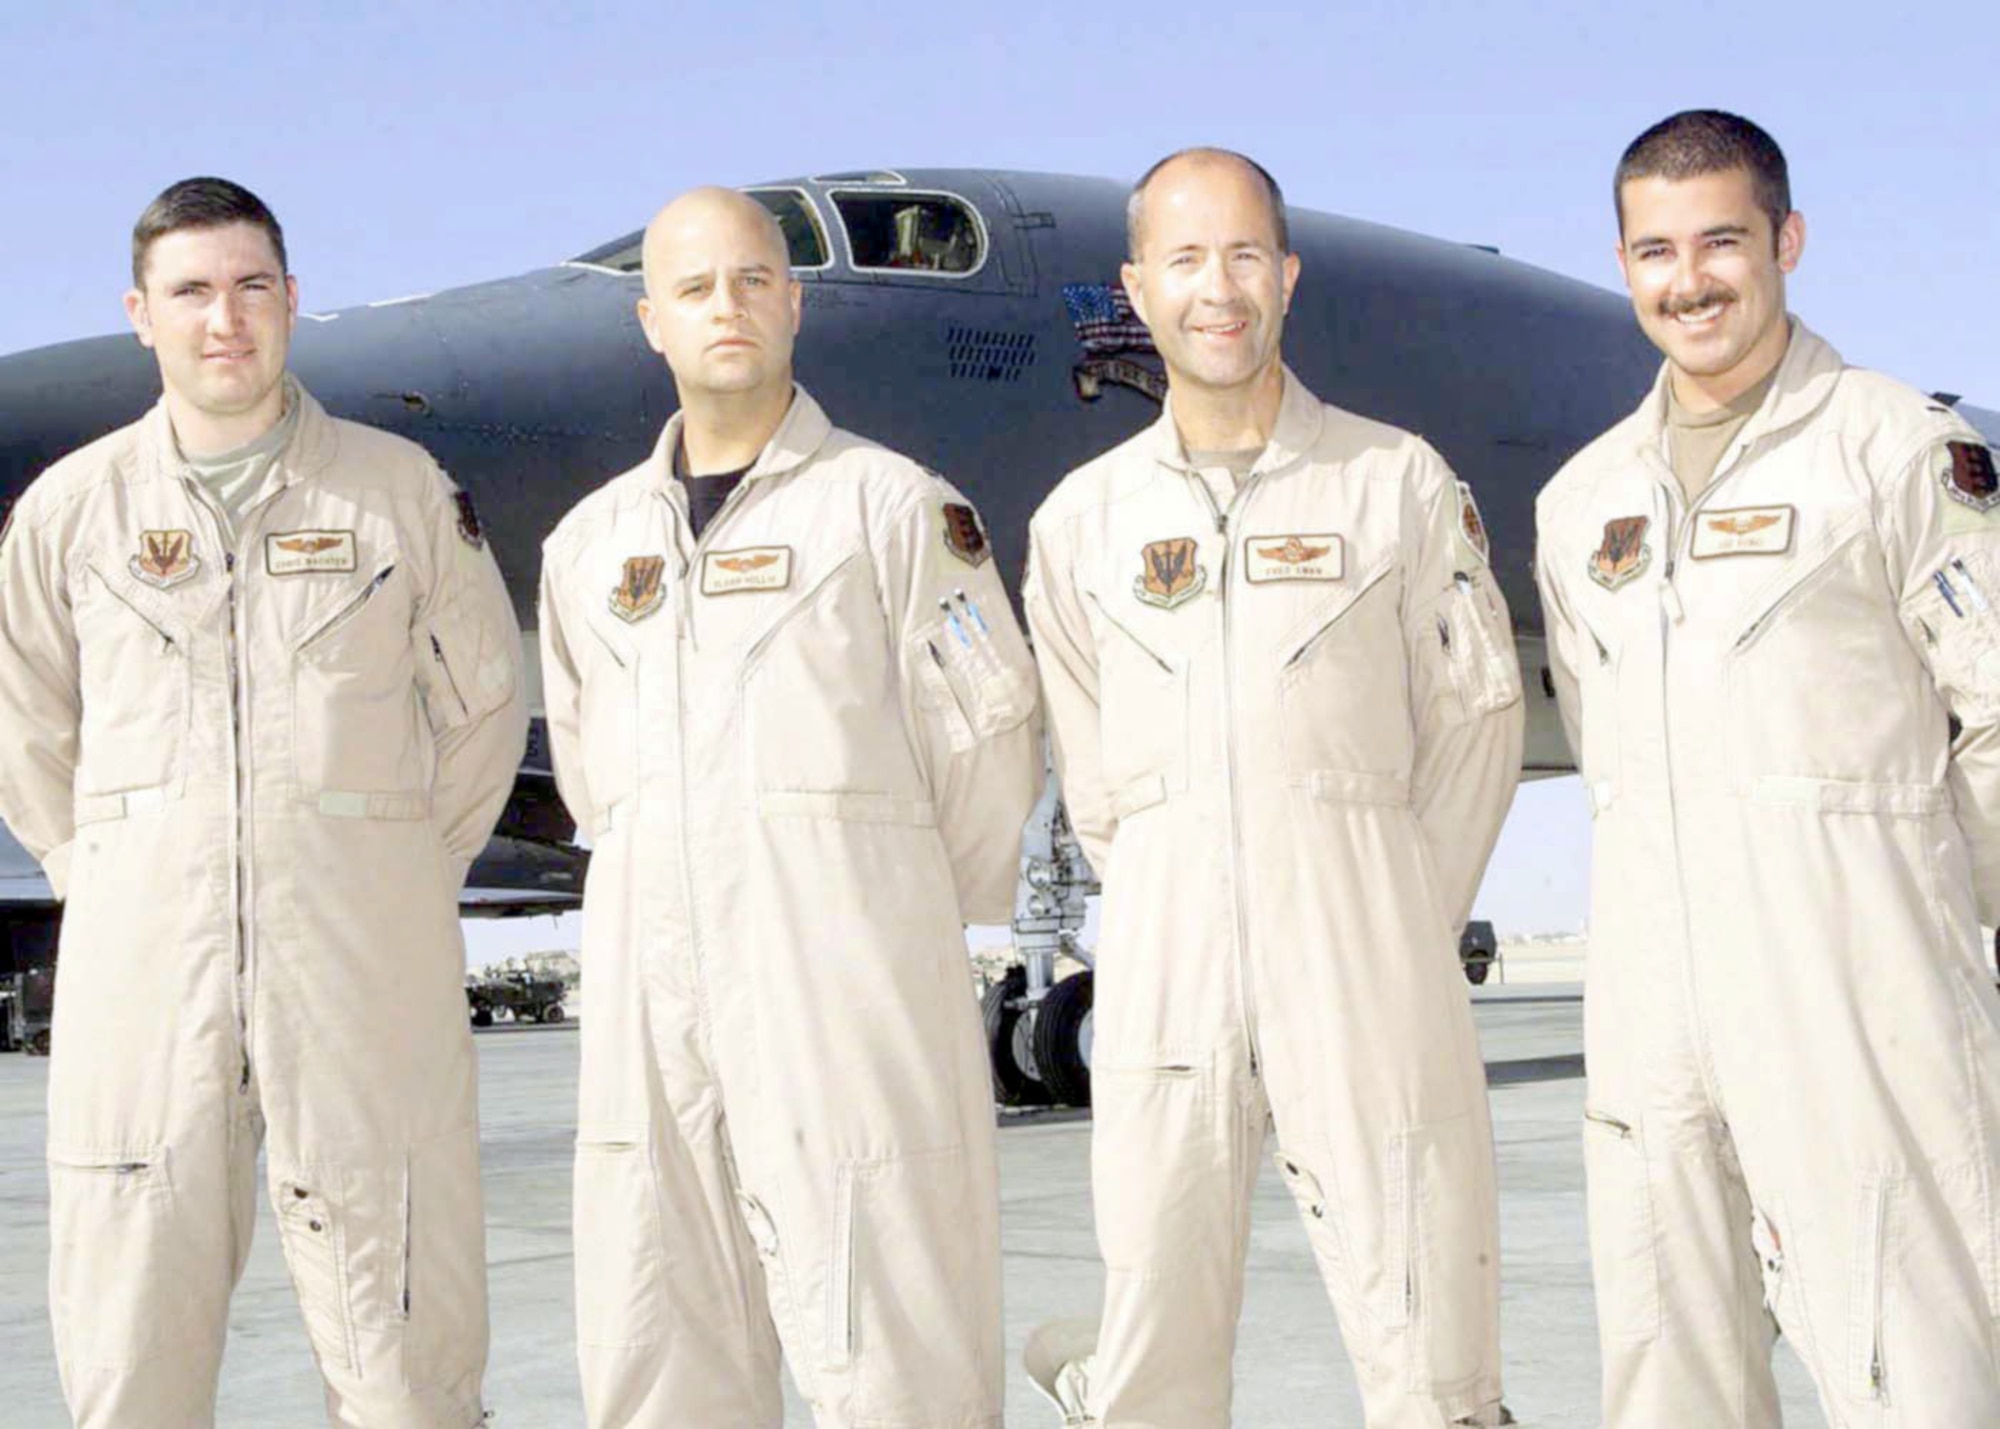 On April 7, 2003, a B-1B Lancer crew from the 28th Bomb Wing quickly found and destroyed a newly-identified high-value target. Pictured are the crew (left to right): Capt. Chris Wachter, Capt. Sloan Hollis, Lt. Col. Fred Swan and 1st Lt. Joe Runci. (U.S. Air Force photo)